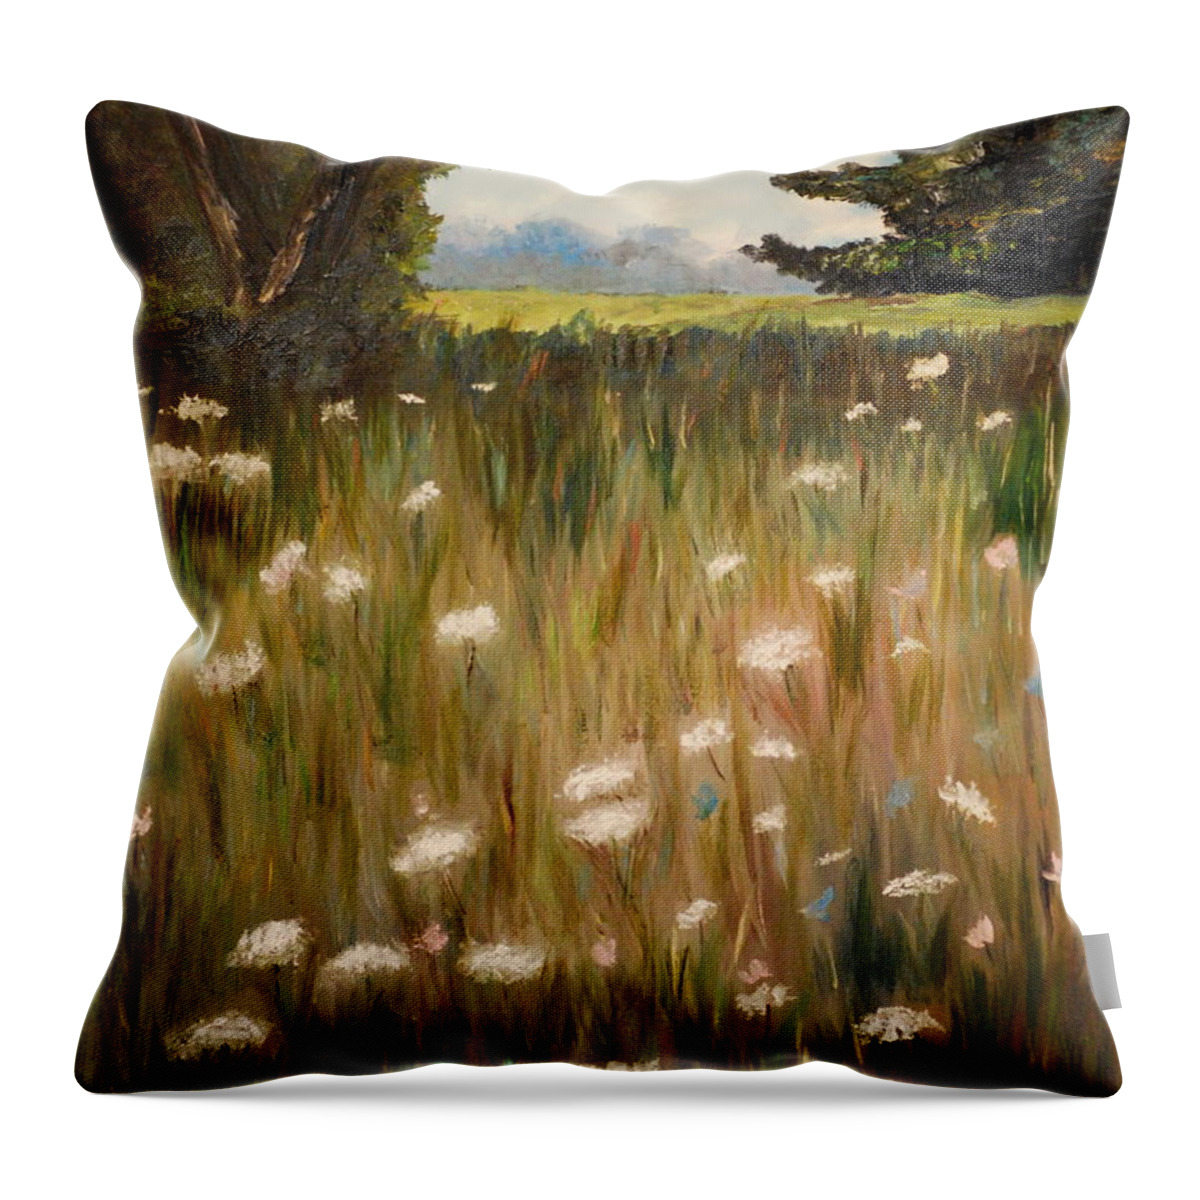 Field Throw Pillow featuring the painting Queen Anne Lace by Phil Burton